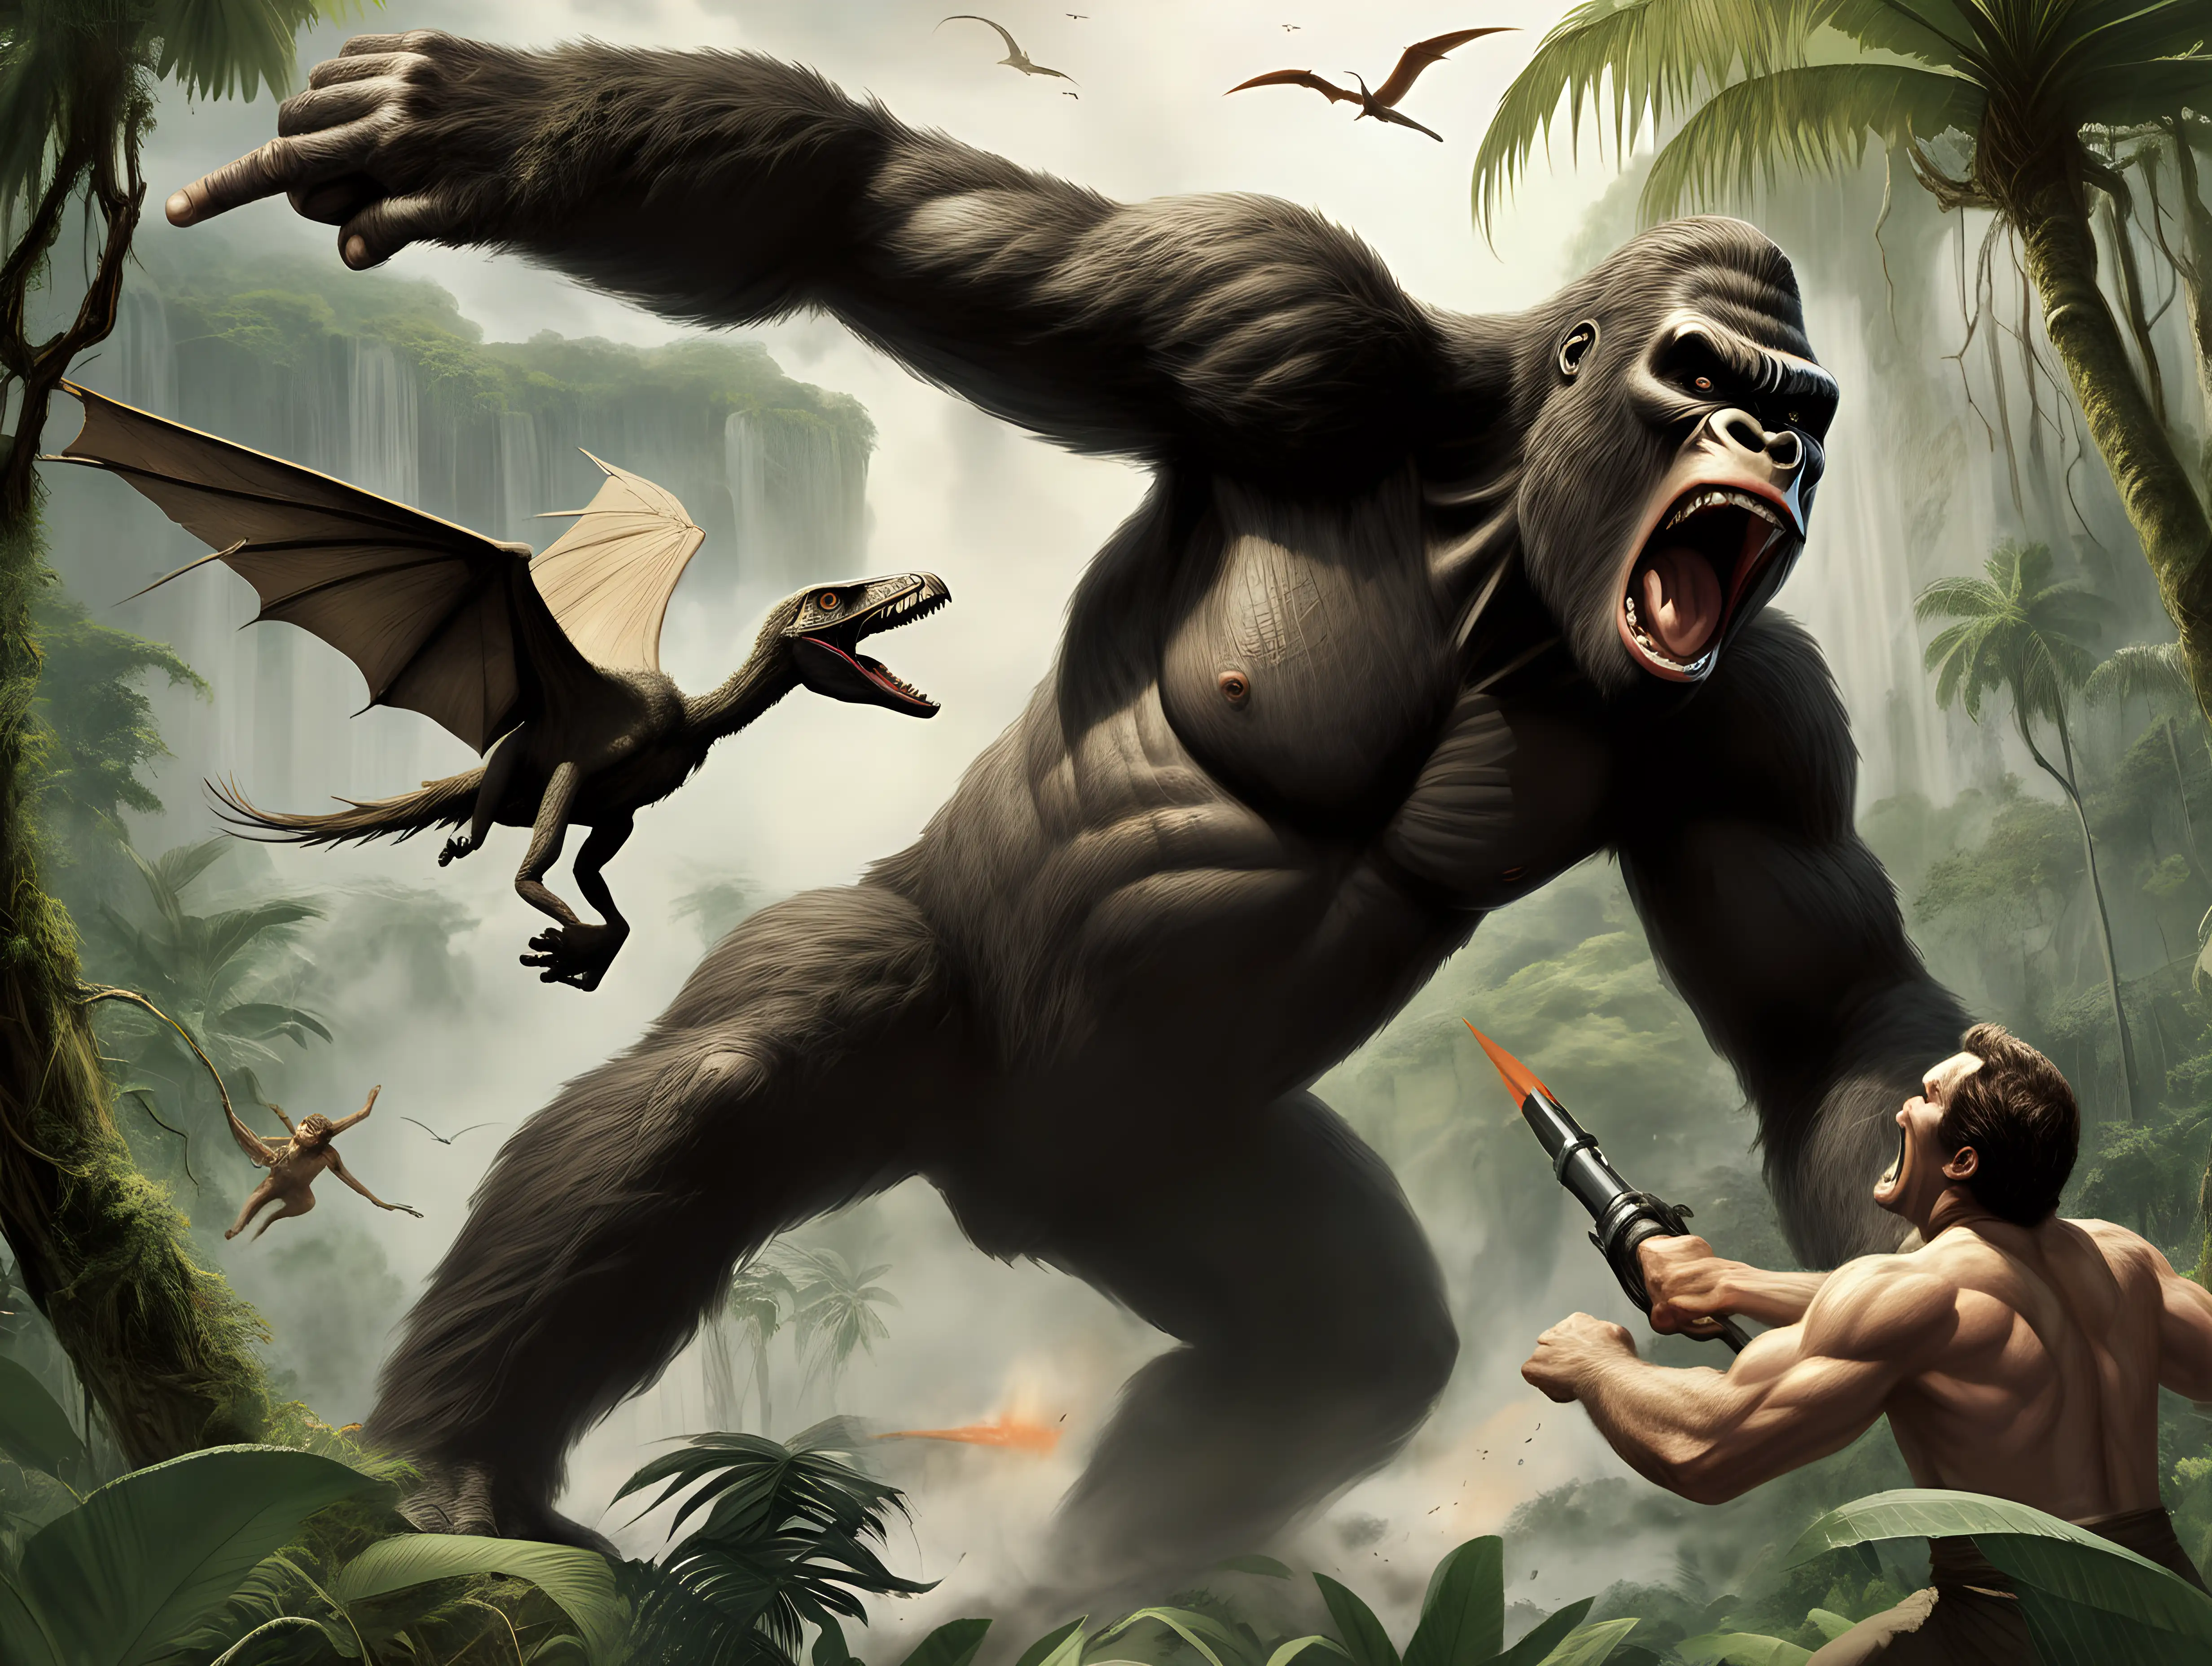 Epic Battle King Kong Confronts a Pterodactyl in the Jungle